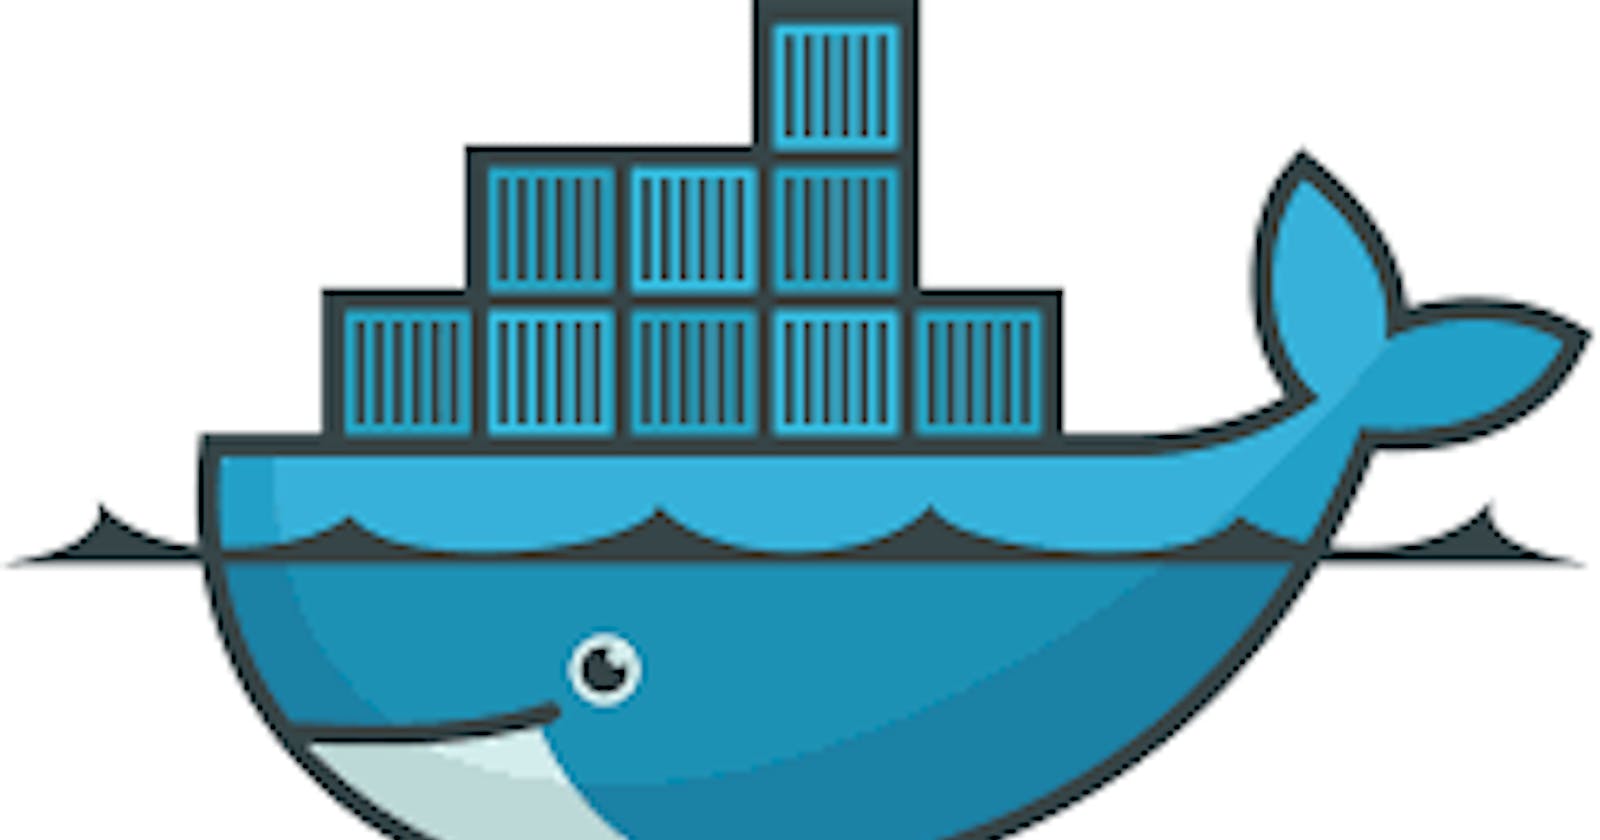 Docker Architecture , Advantages and Hands-on Lab on Docker Container.